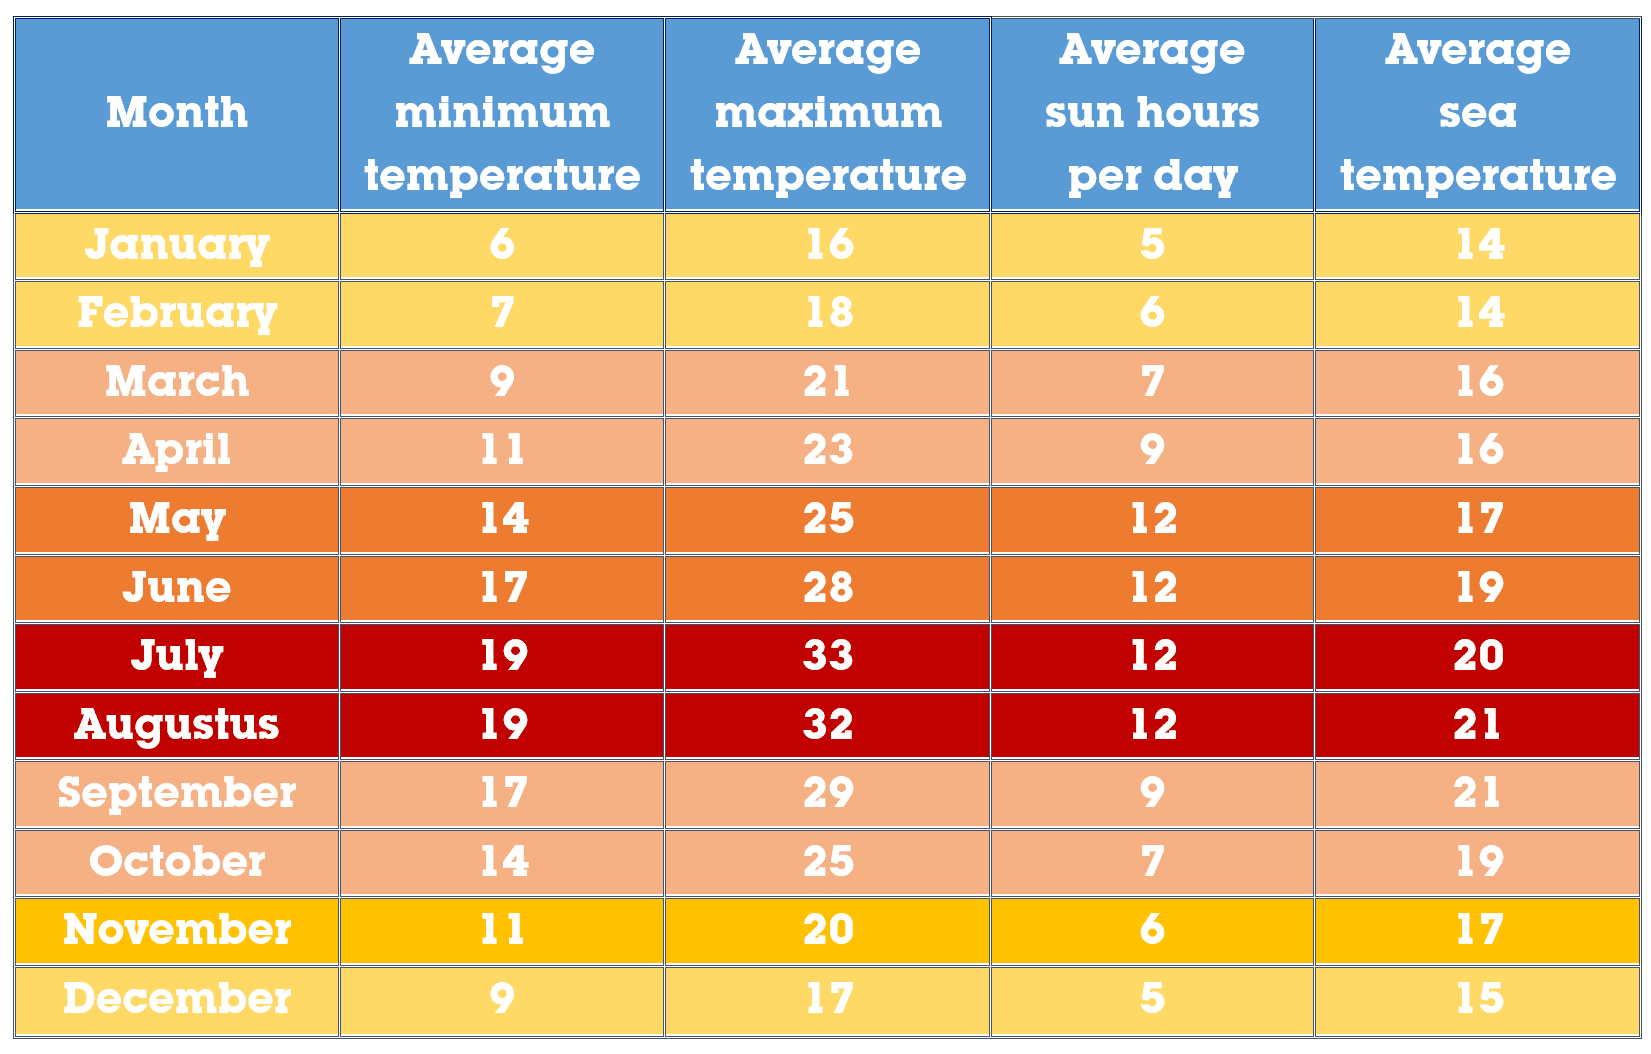 A graph showing the average monthly temperature in Algarve, highlighting the best time to visit Algarve for pleasant weather.